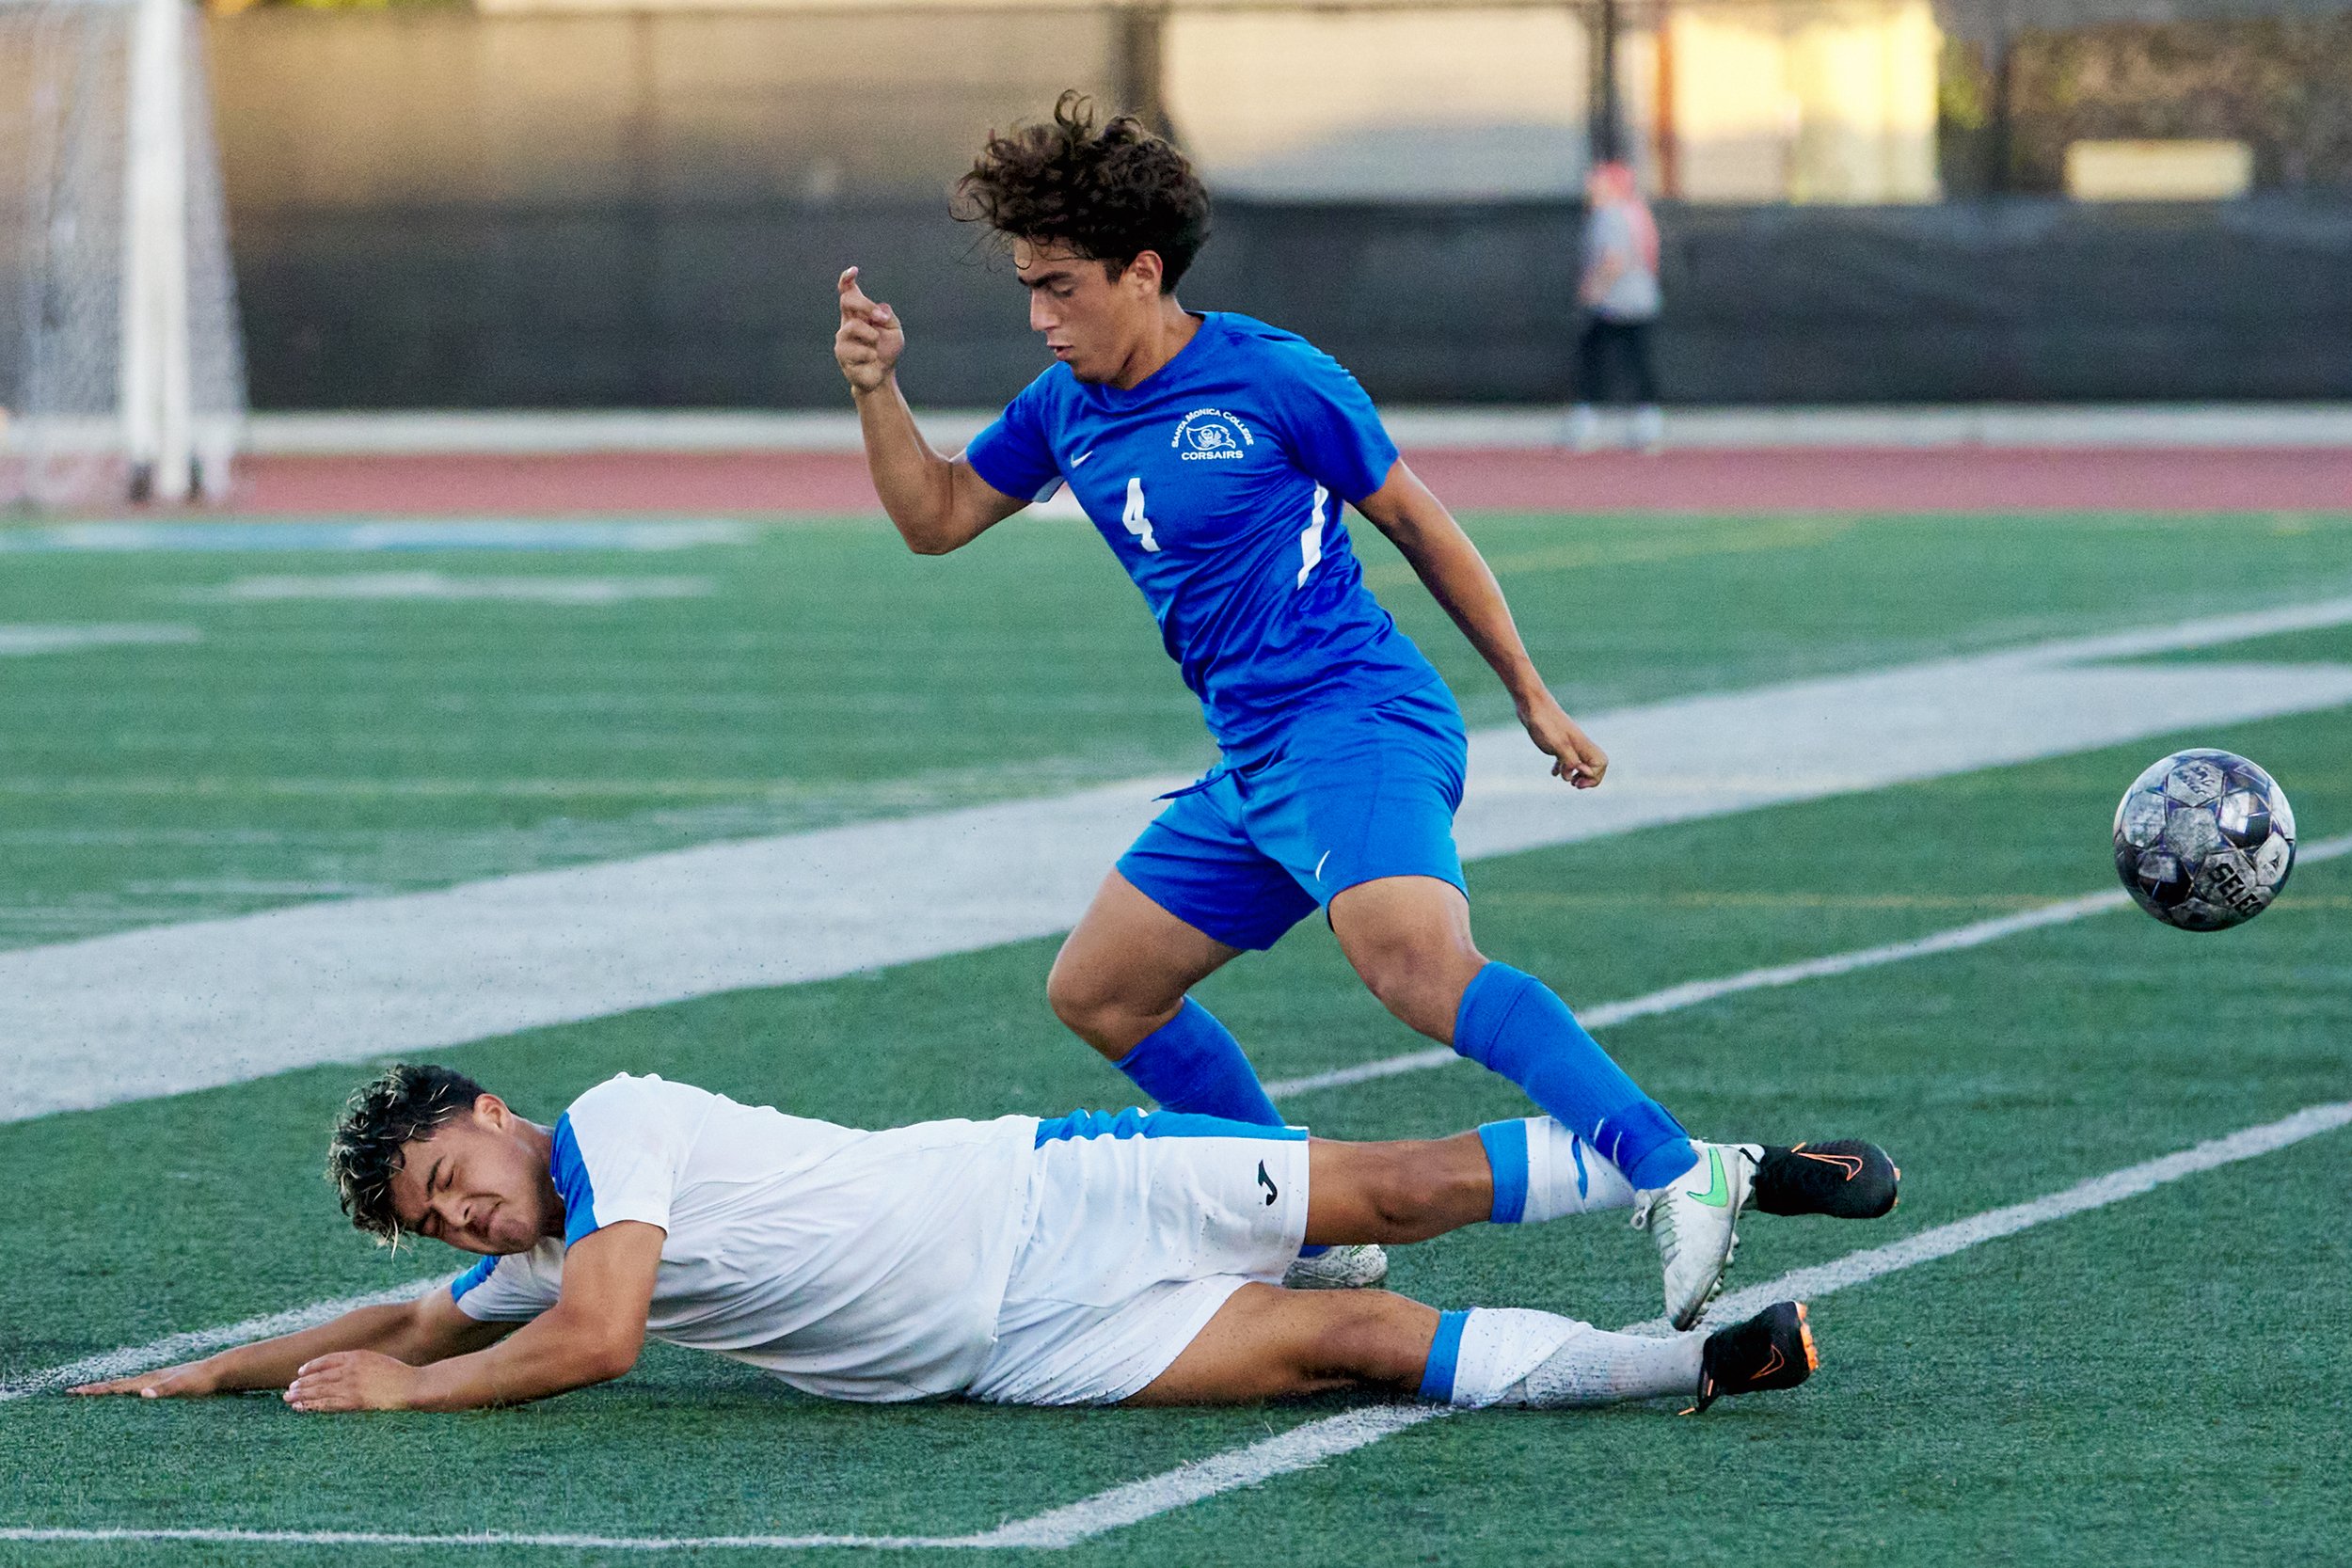  Oxnard College Condors' Andy Cruz got a yellow card for this slide into a collision at Santa Monica College Corsairs' Jose Arias during the men's soccer match on Tuesday, Oct. 18, 2022, at Corsair Field in Santa Monica, Calif. The Corsairs lost 0-3.